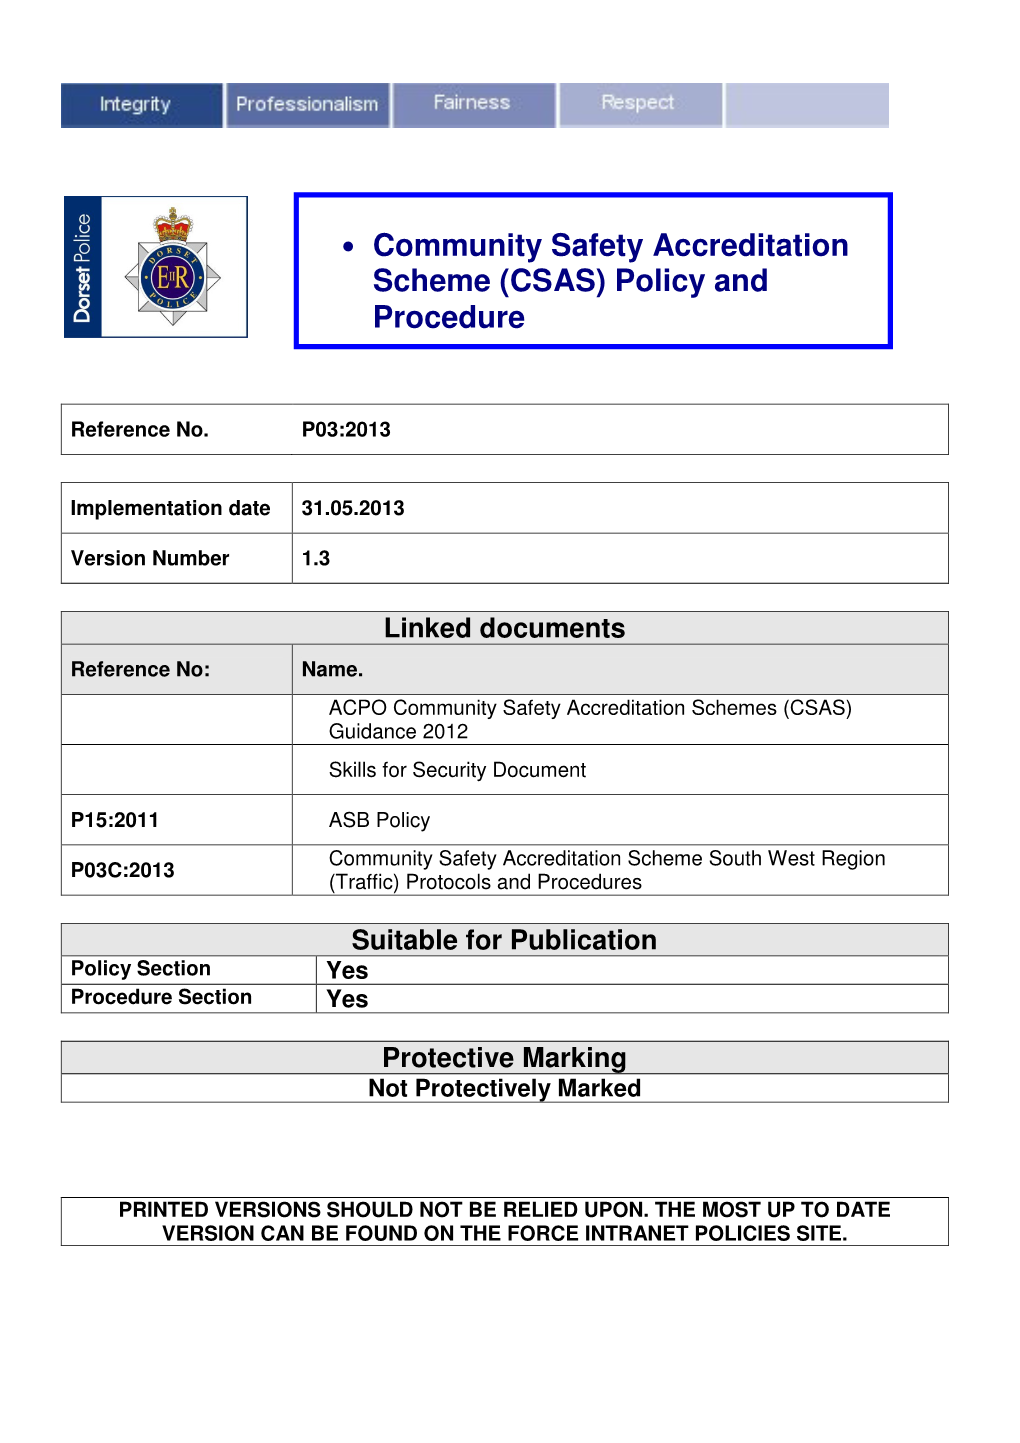 Community Safety Accreditation Scheme (CSAS) Policy And